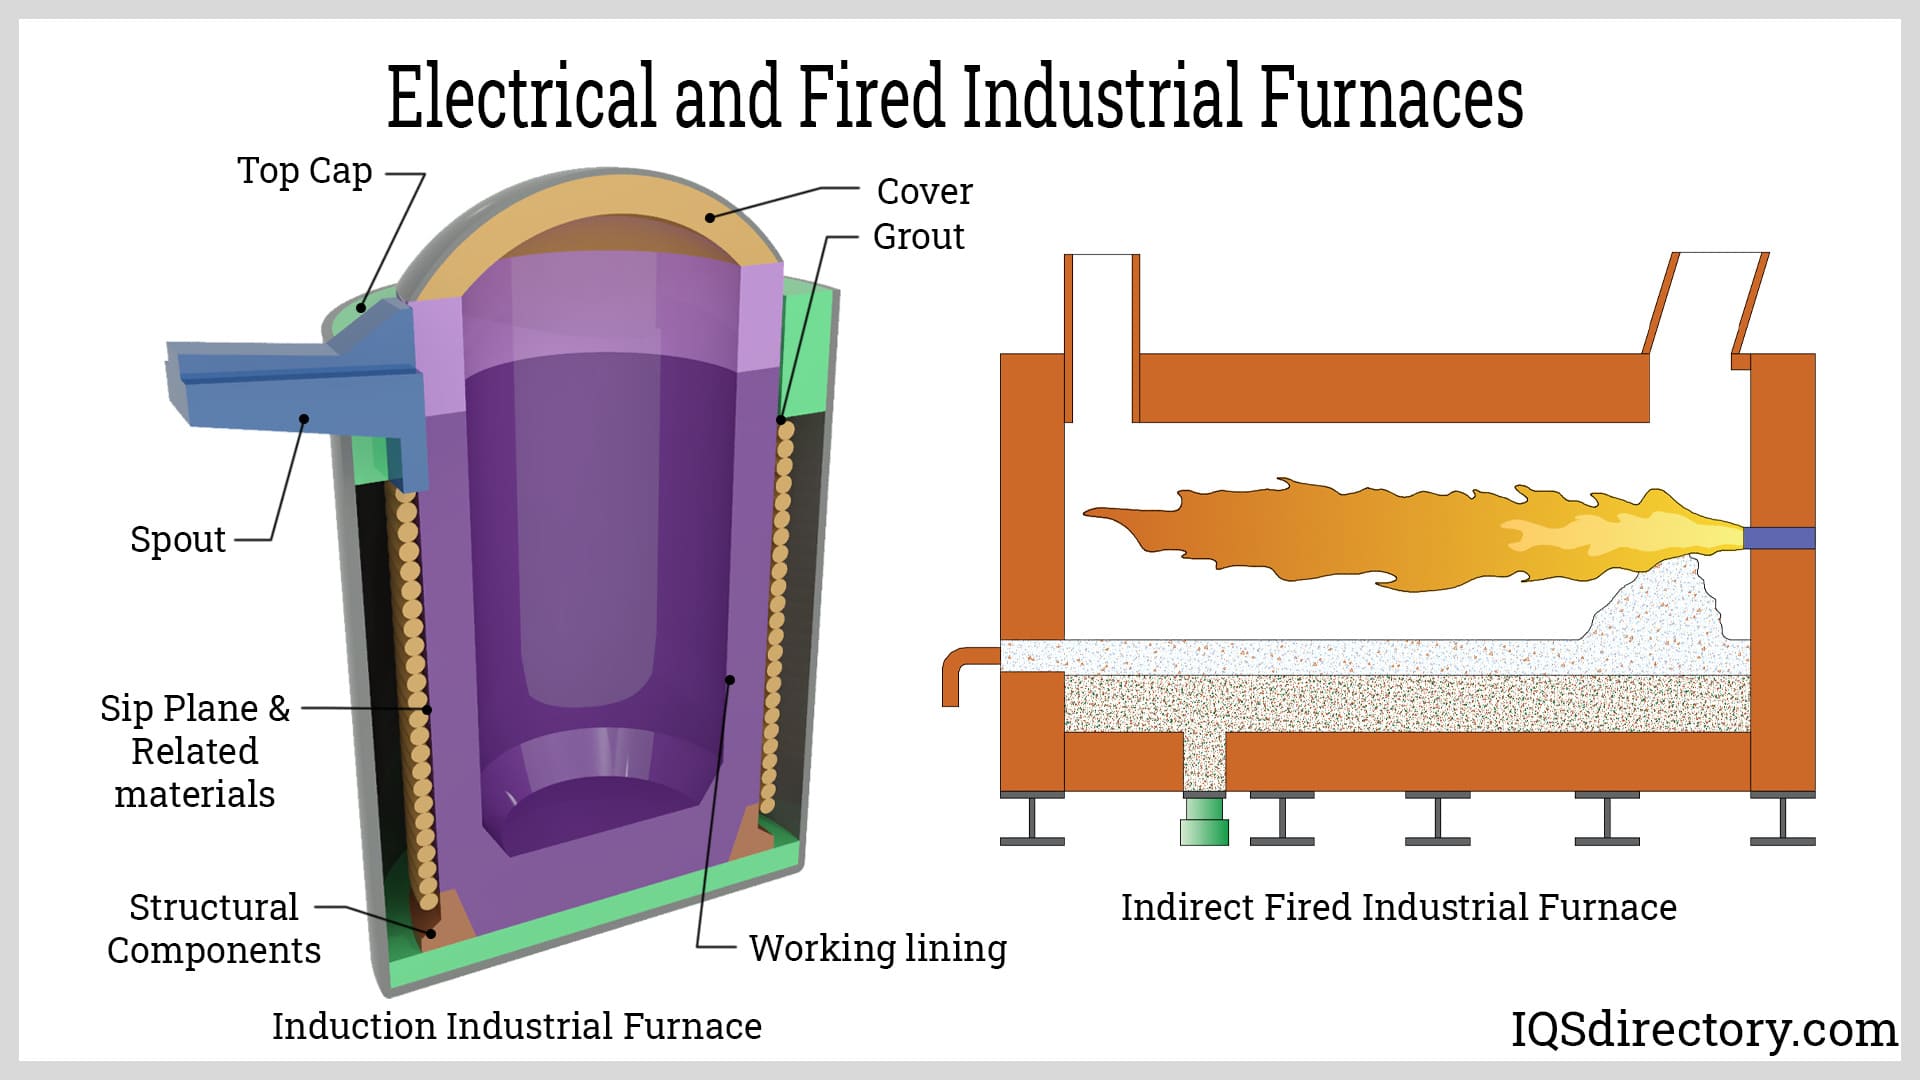 Electrical and Fired Industrial Furnaces